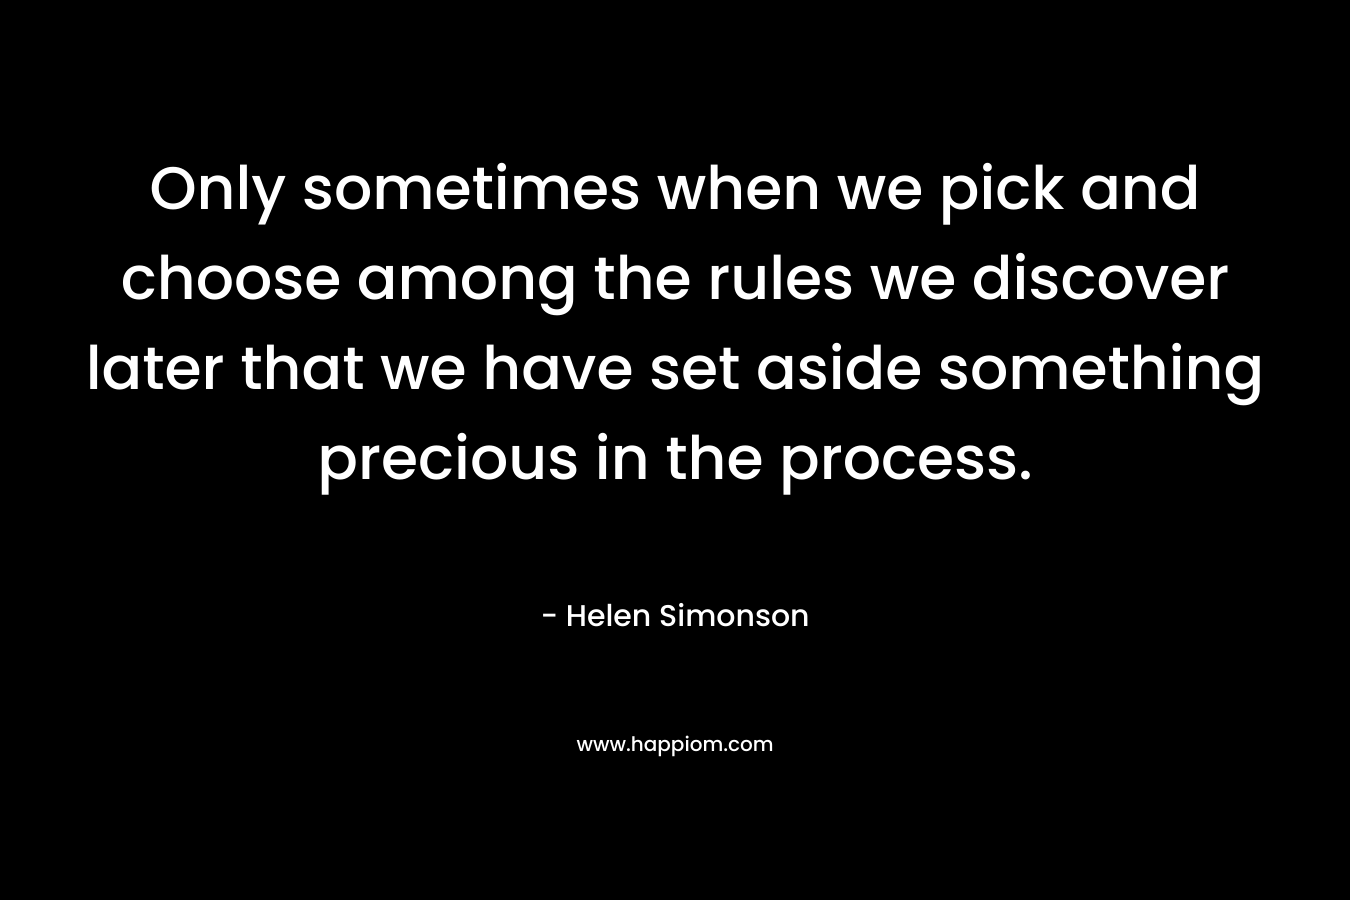 Only sometimes when we pick and choose among the rules we discover later that we have set aside something precious in the process. – Helen Simonson